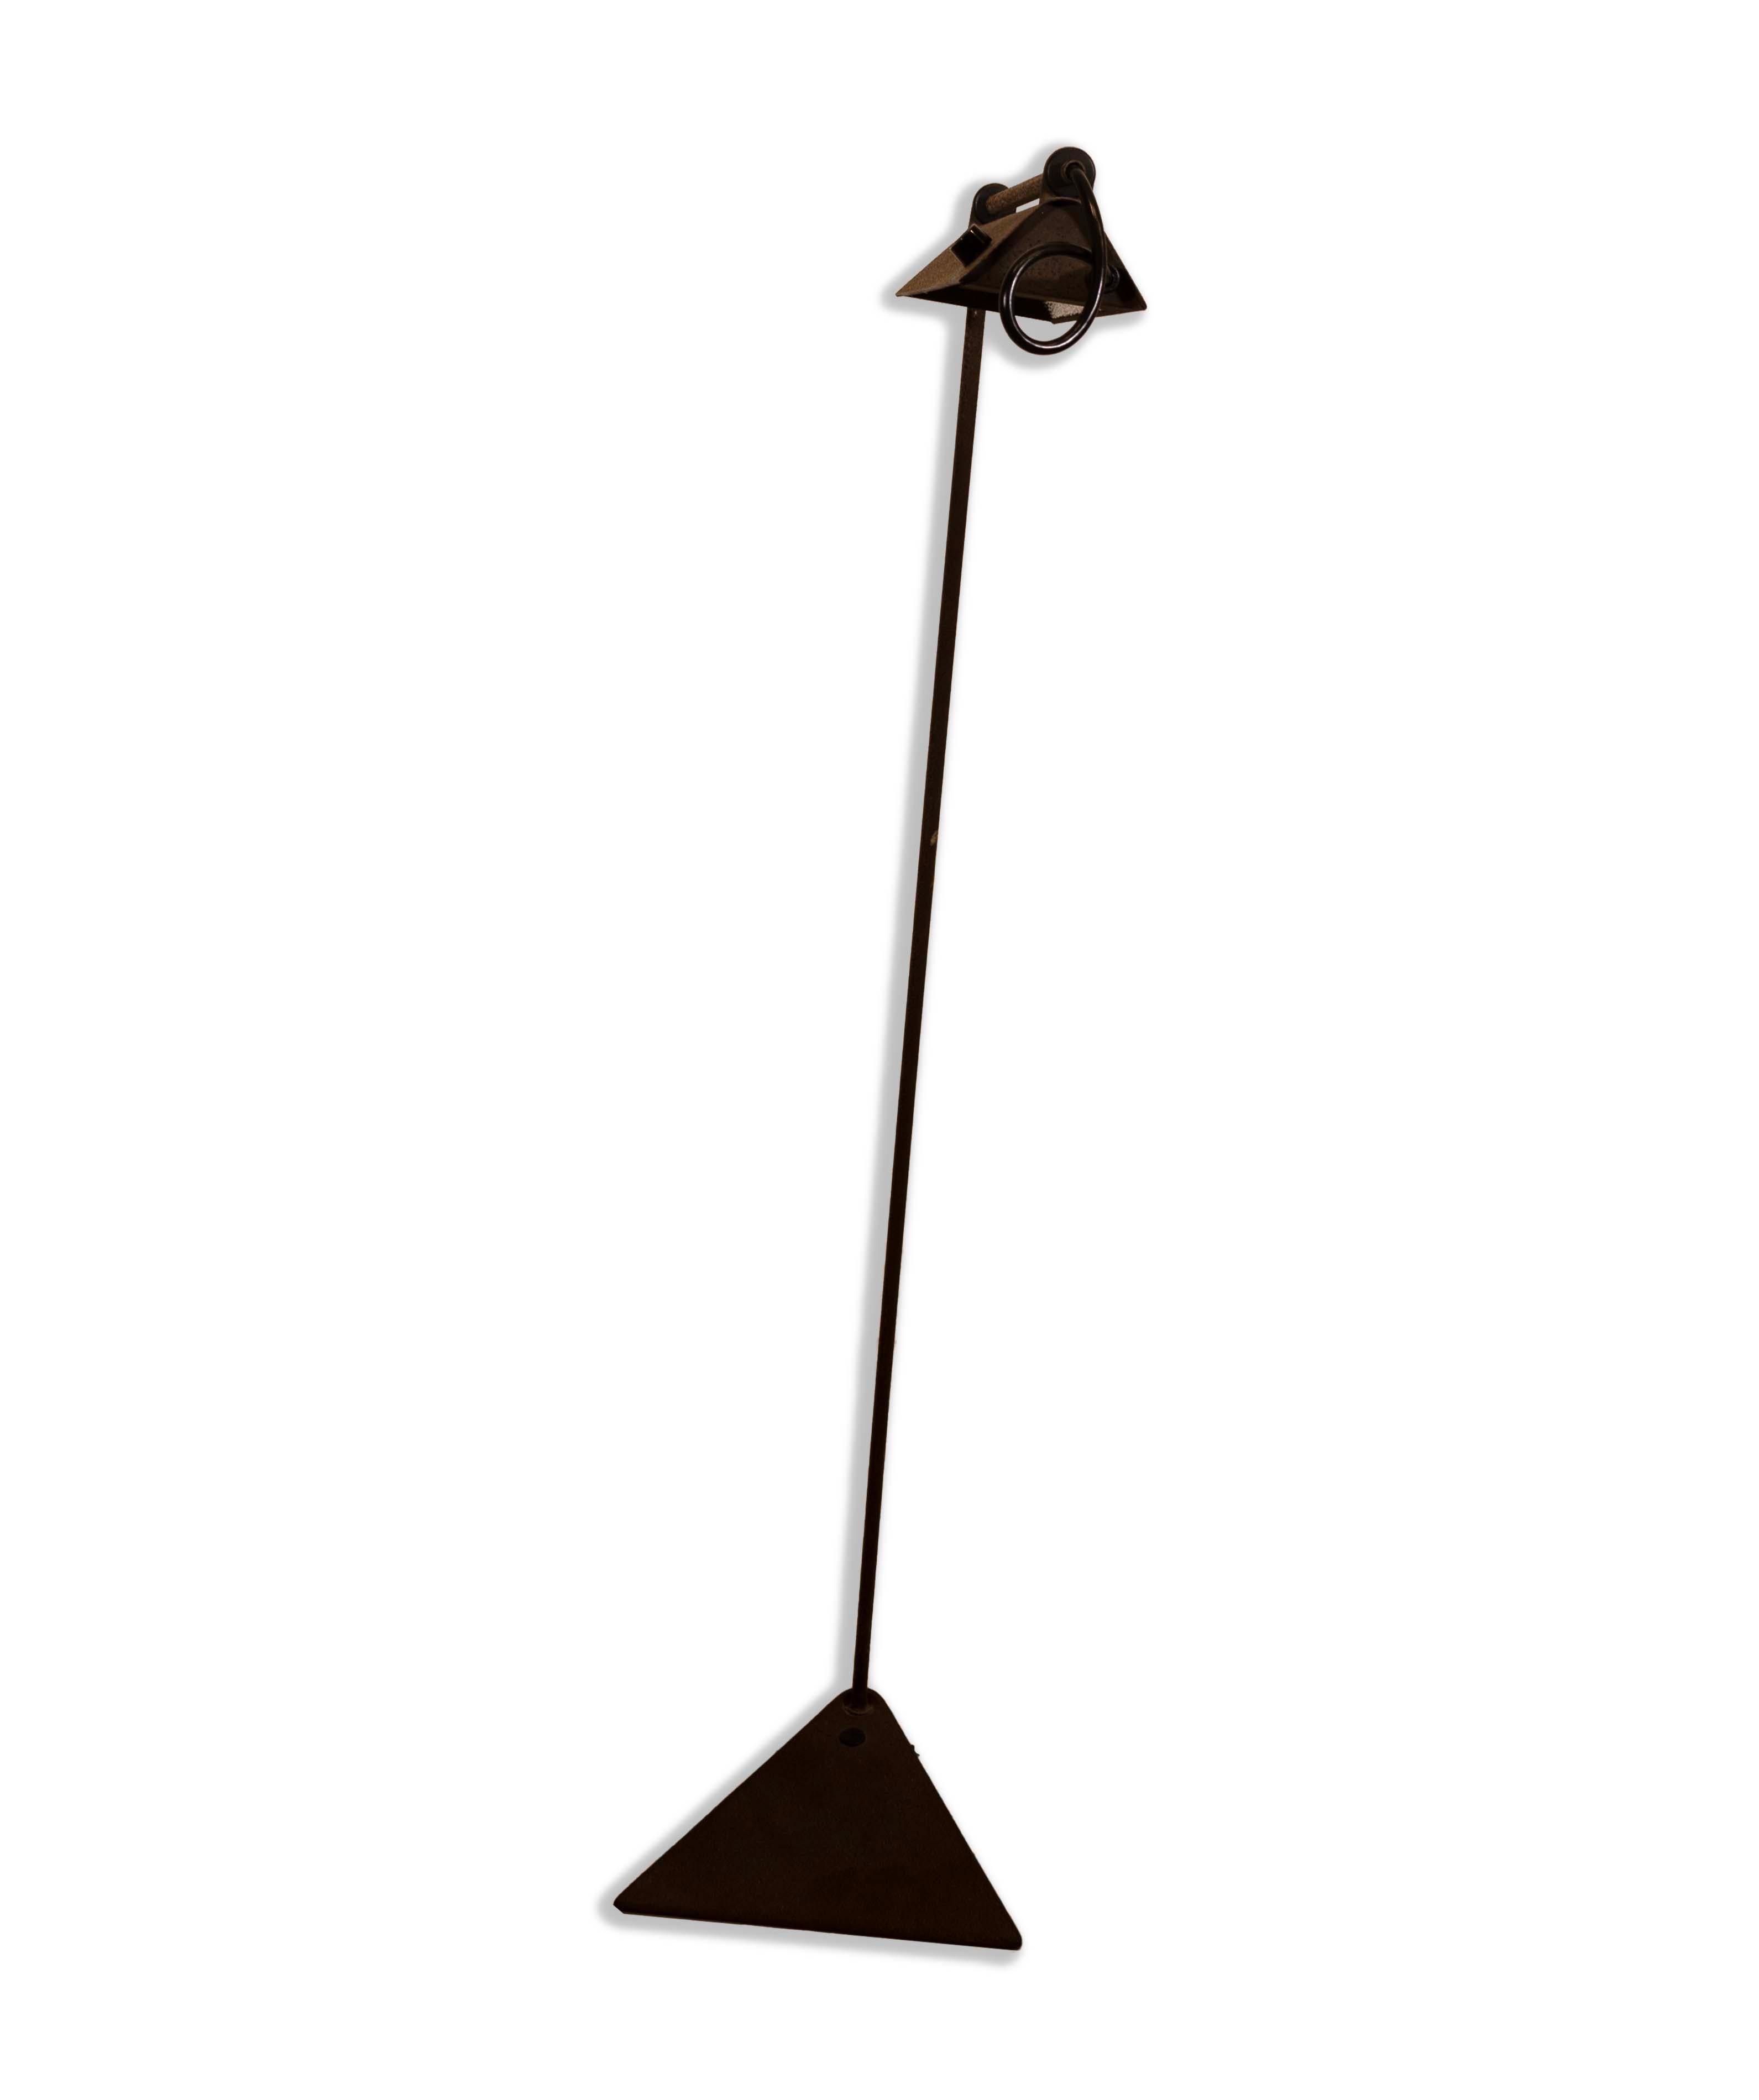 A minimal postmodern articulating “Delta” metal floor lamp designed by Piotr Sierakowski for Koch and Lowy A brutalist design with a patinated textured metal triangular base and one cantilevered adjustable arm. A simplistic light to add ambience or